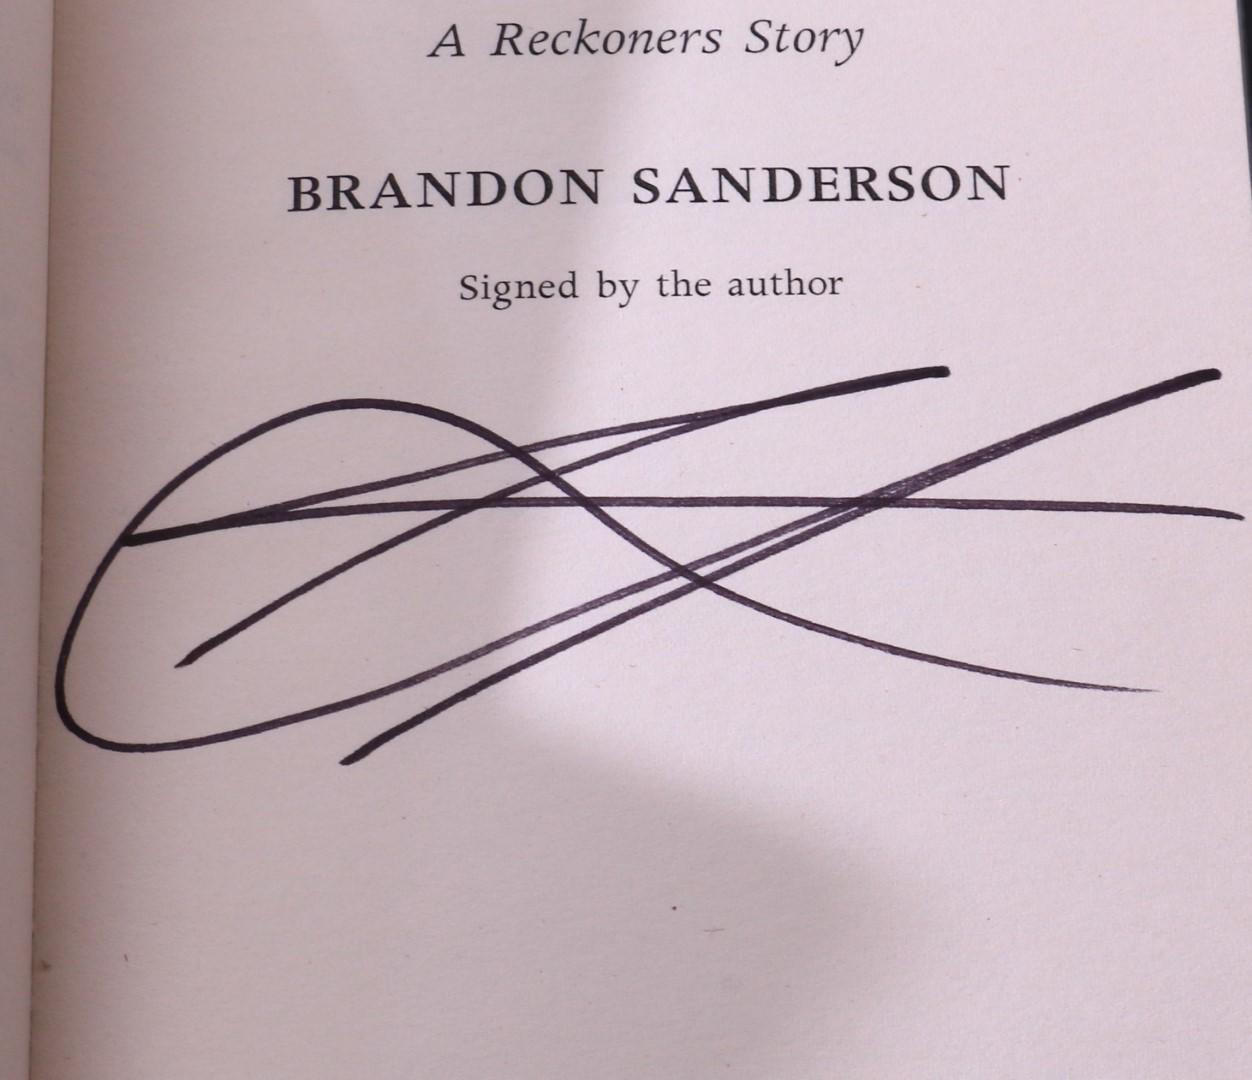 Brandon Sanderson - The Reckoners [comprising] Steelheart, Mitosis, Firefight and Calamity - Gollancz, 2013-2016, Signed Limited Edition.